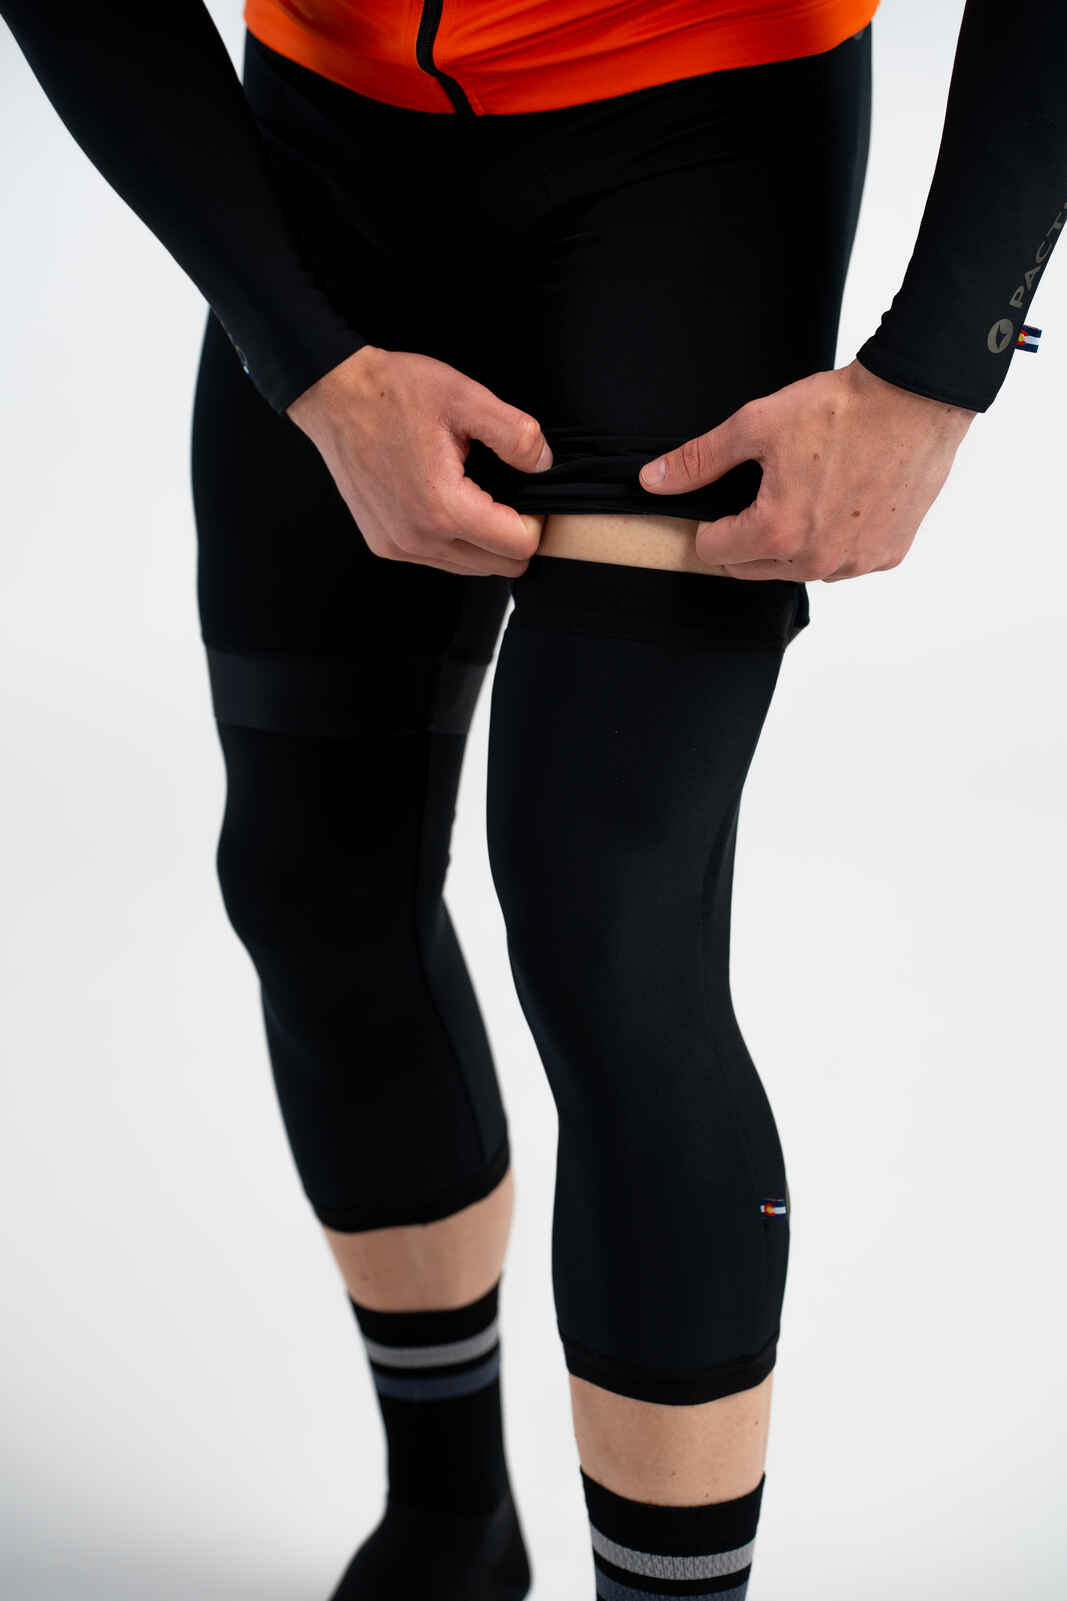 Forge Compression Tight, Women's Cycling